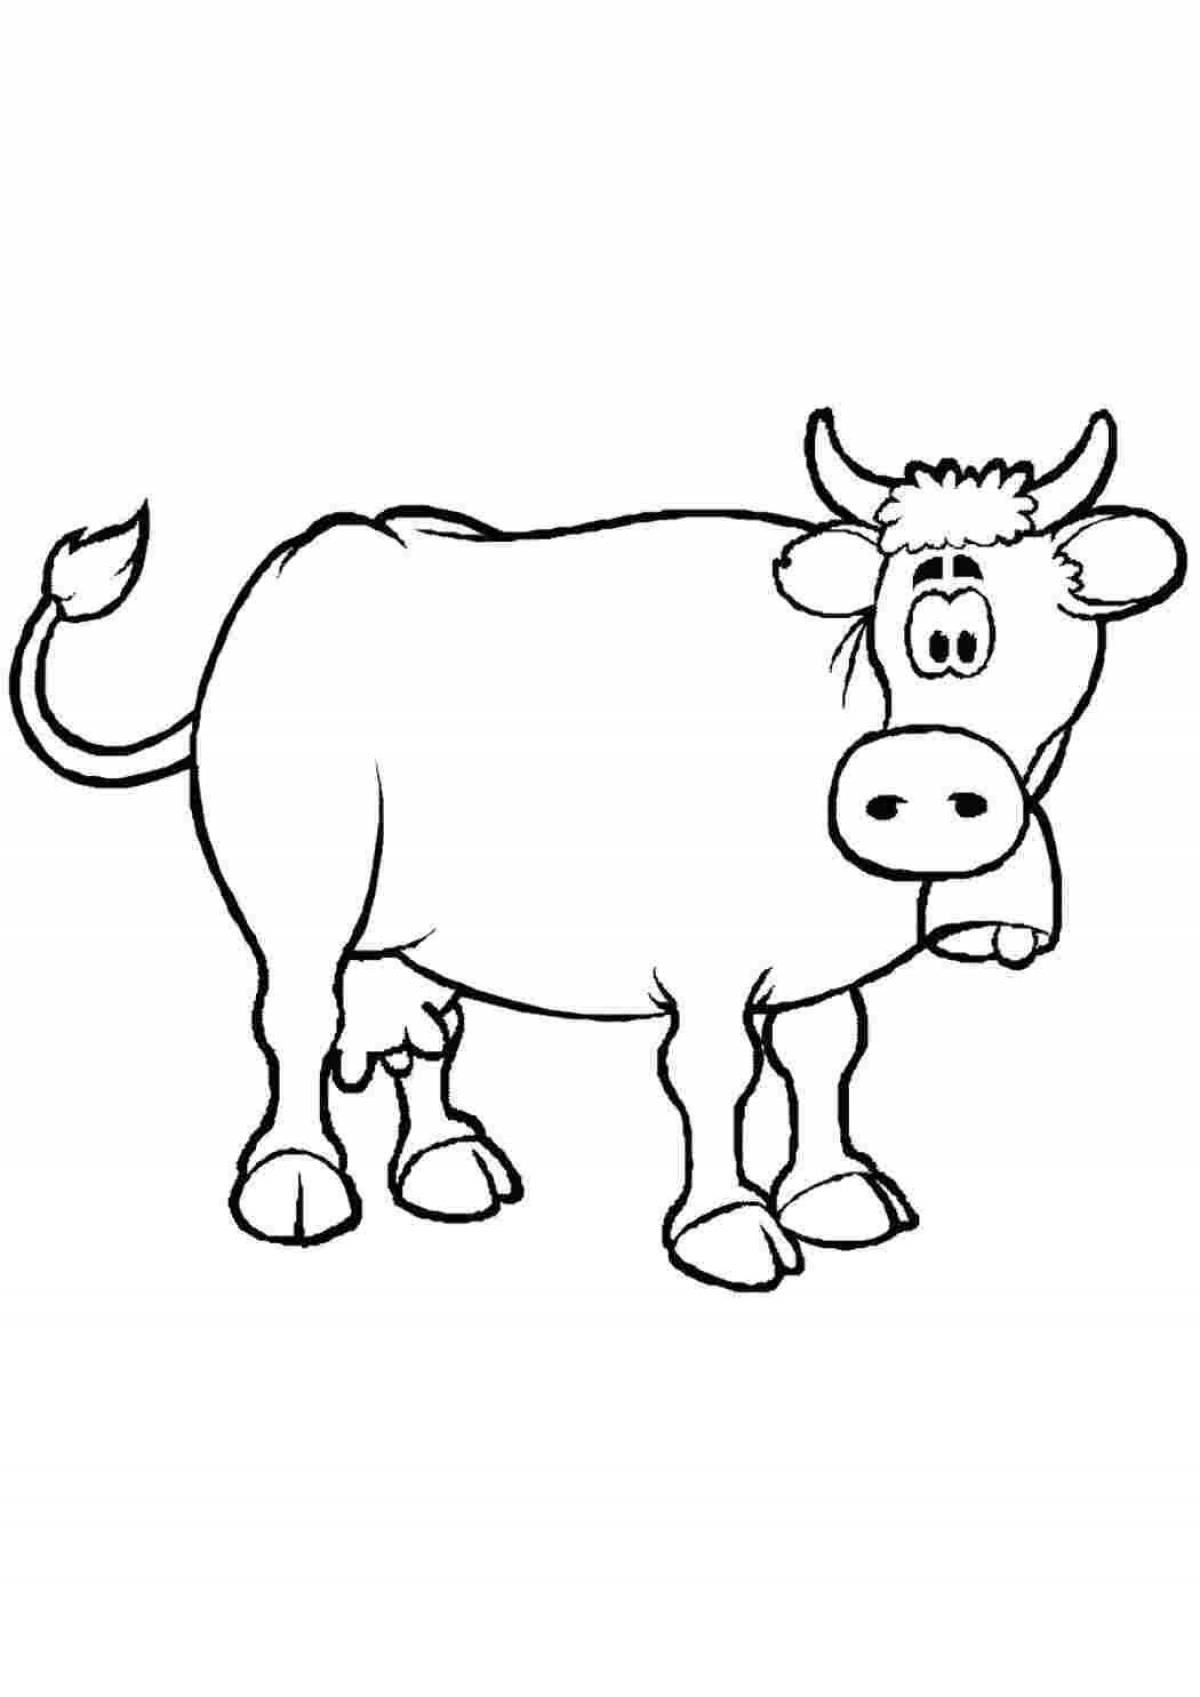 Coloring page festive yellow cow